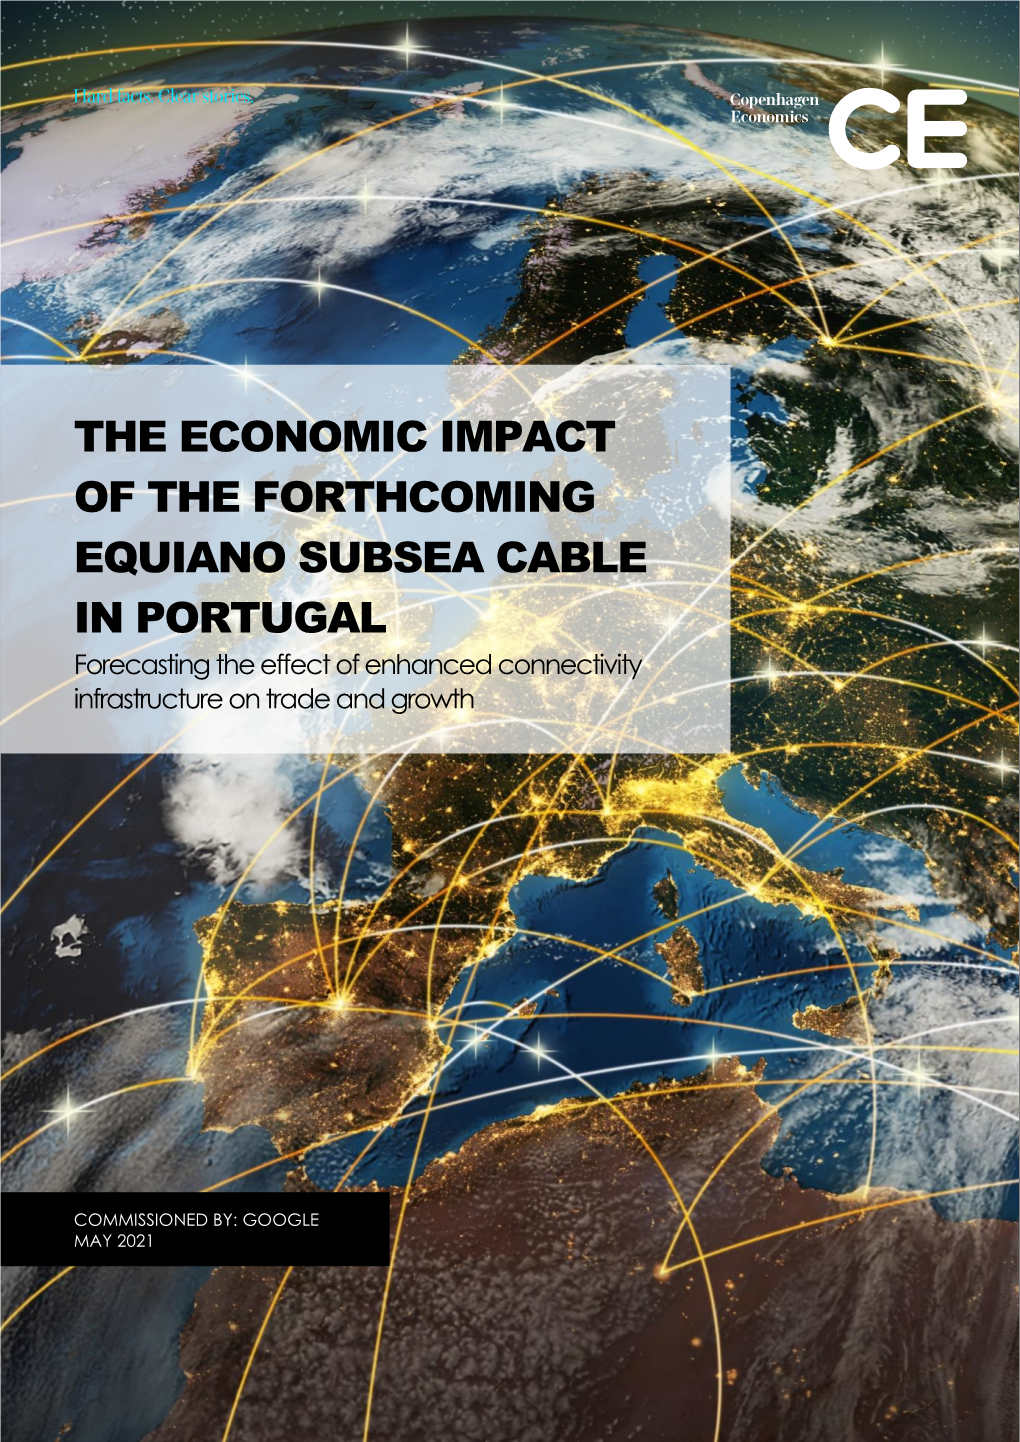 THE ECONOMIC IMPACT of the FORTHCOMING EQUIANO SUBSEA CABLE in PORTUGAL Forecasting the Effect of Enhanced Connectivity Infrastructure on Trade and Growth